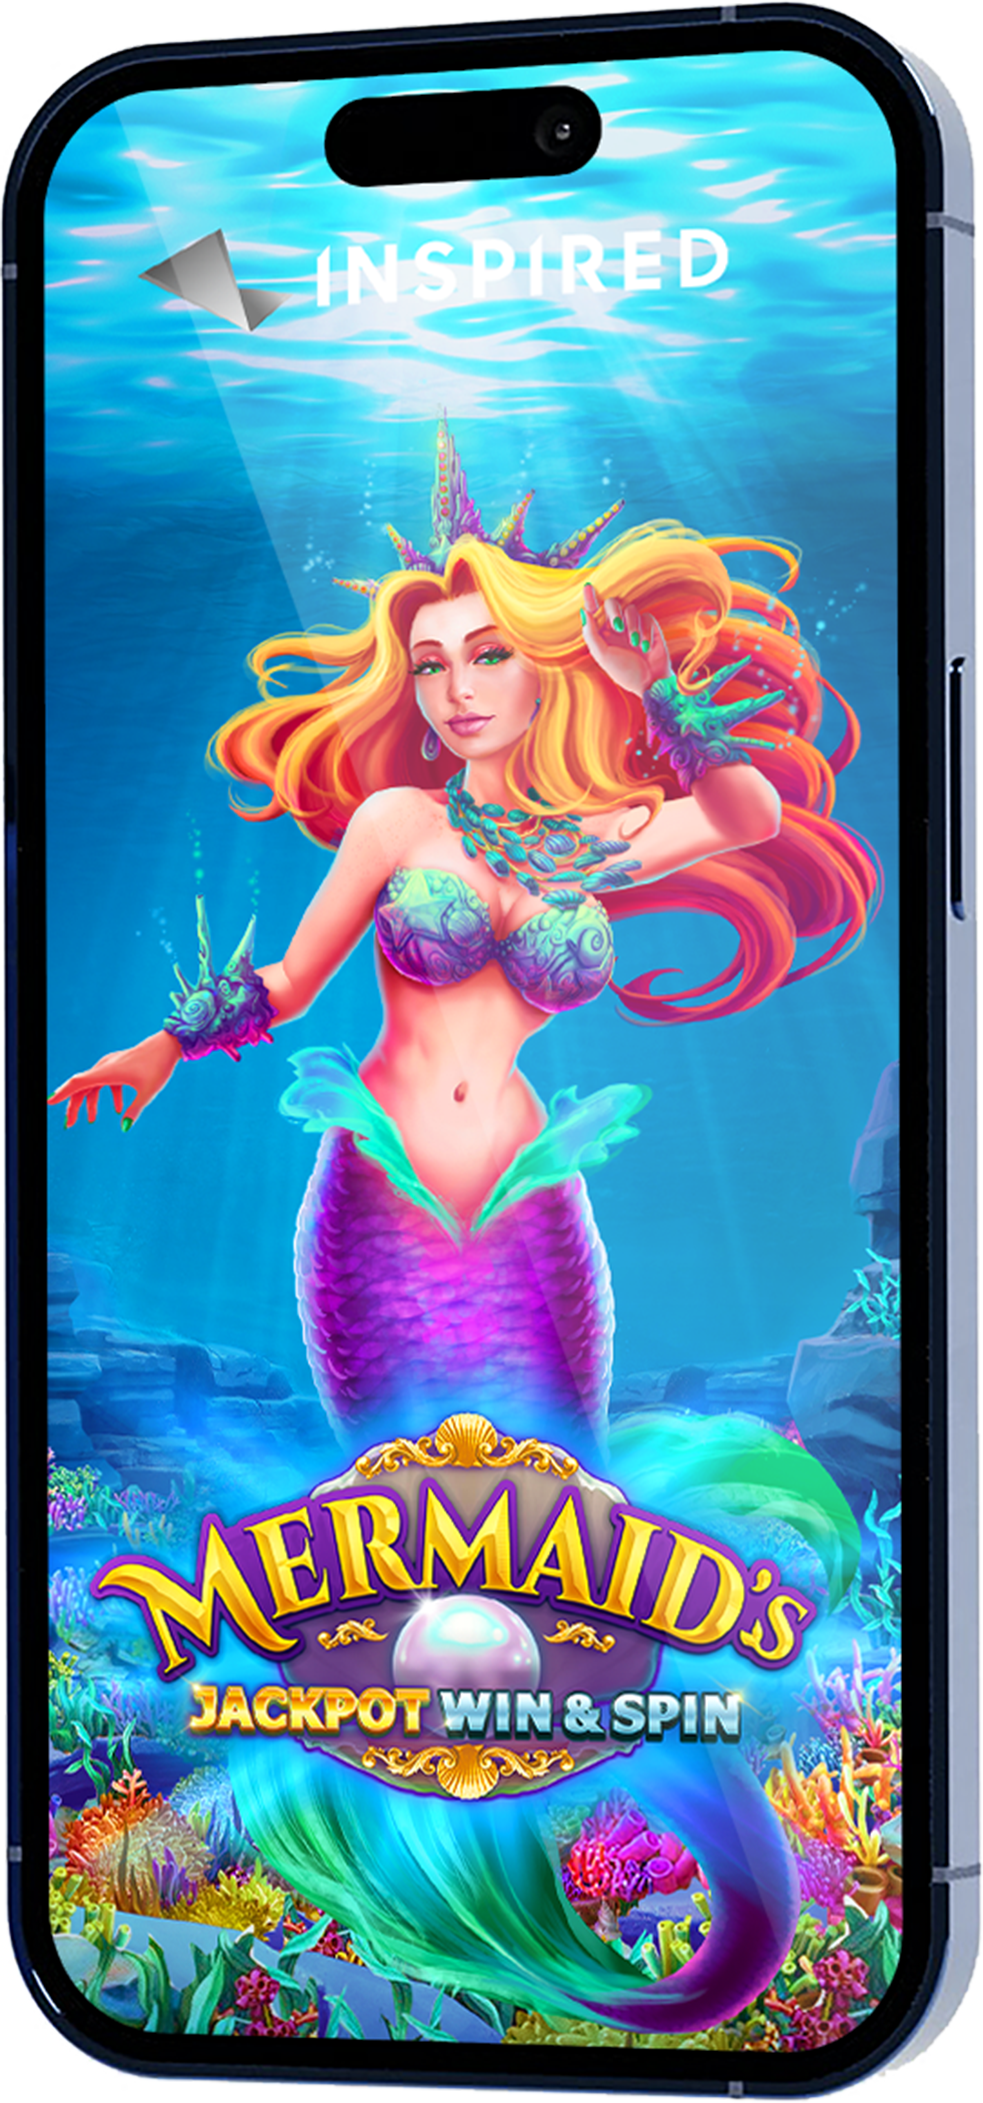 MERMAID’S JACKPOT WIN & SPIN MOBILE